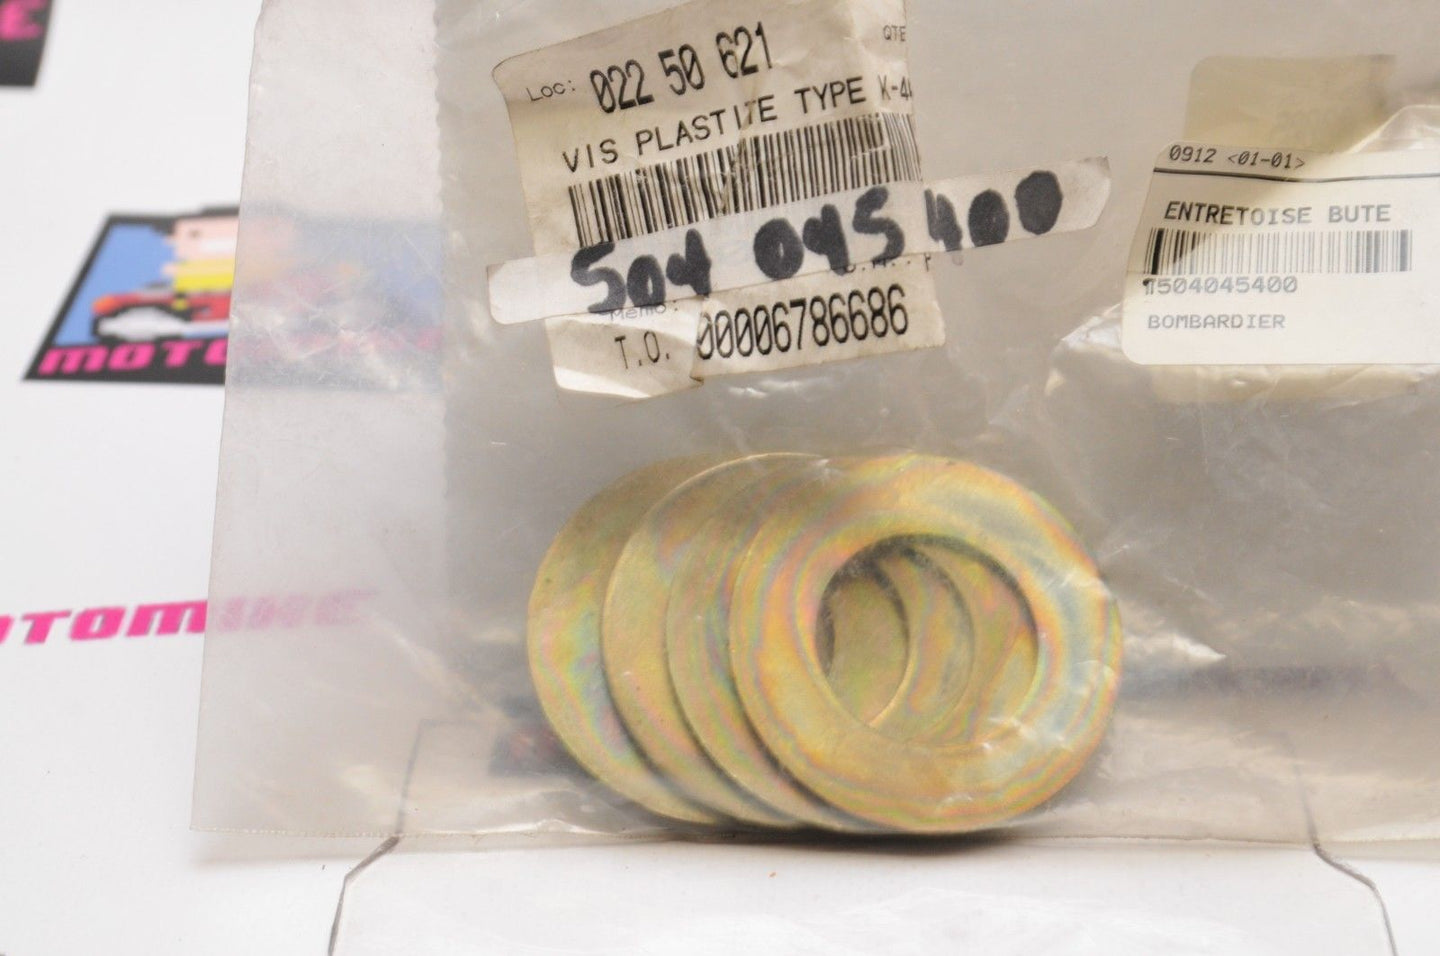 NOS NEW OEM SKIDOO 504045400 Qty:4  WASHER  WASHERS  VINTAGE